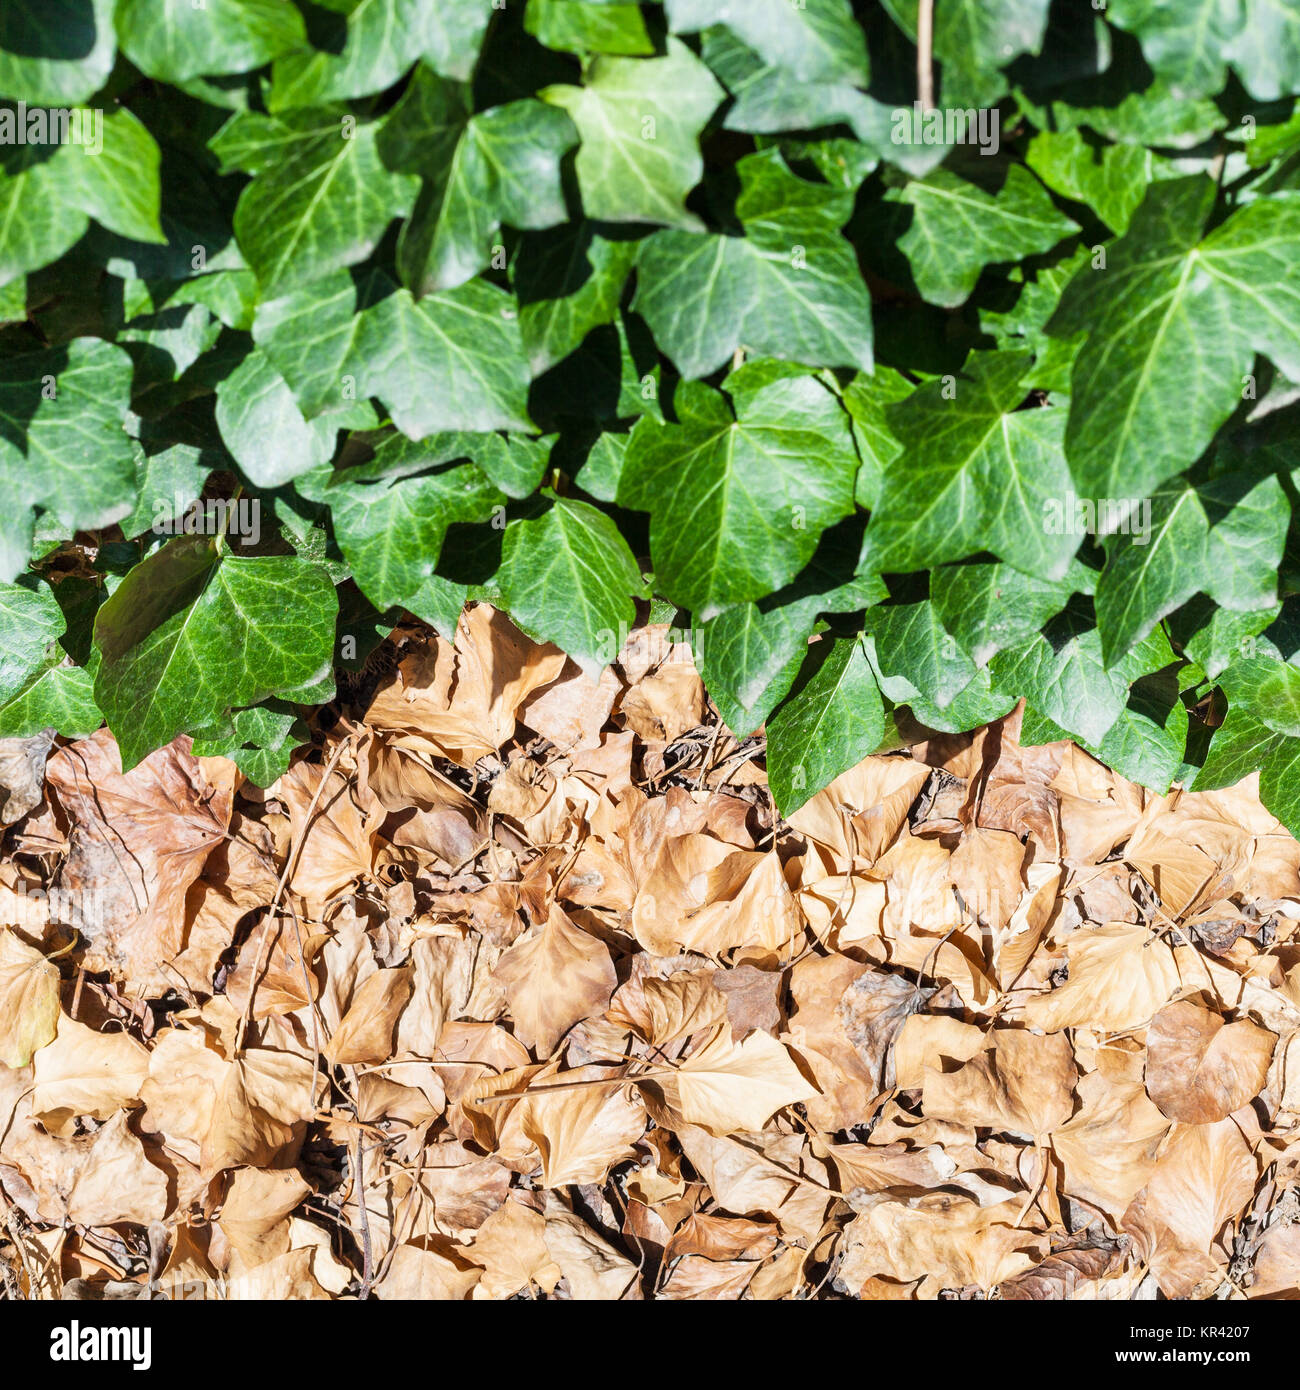 fallen brown and fresh green leaves of ivy plant Stock Photo